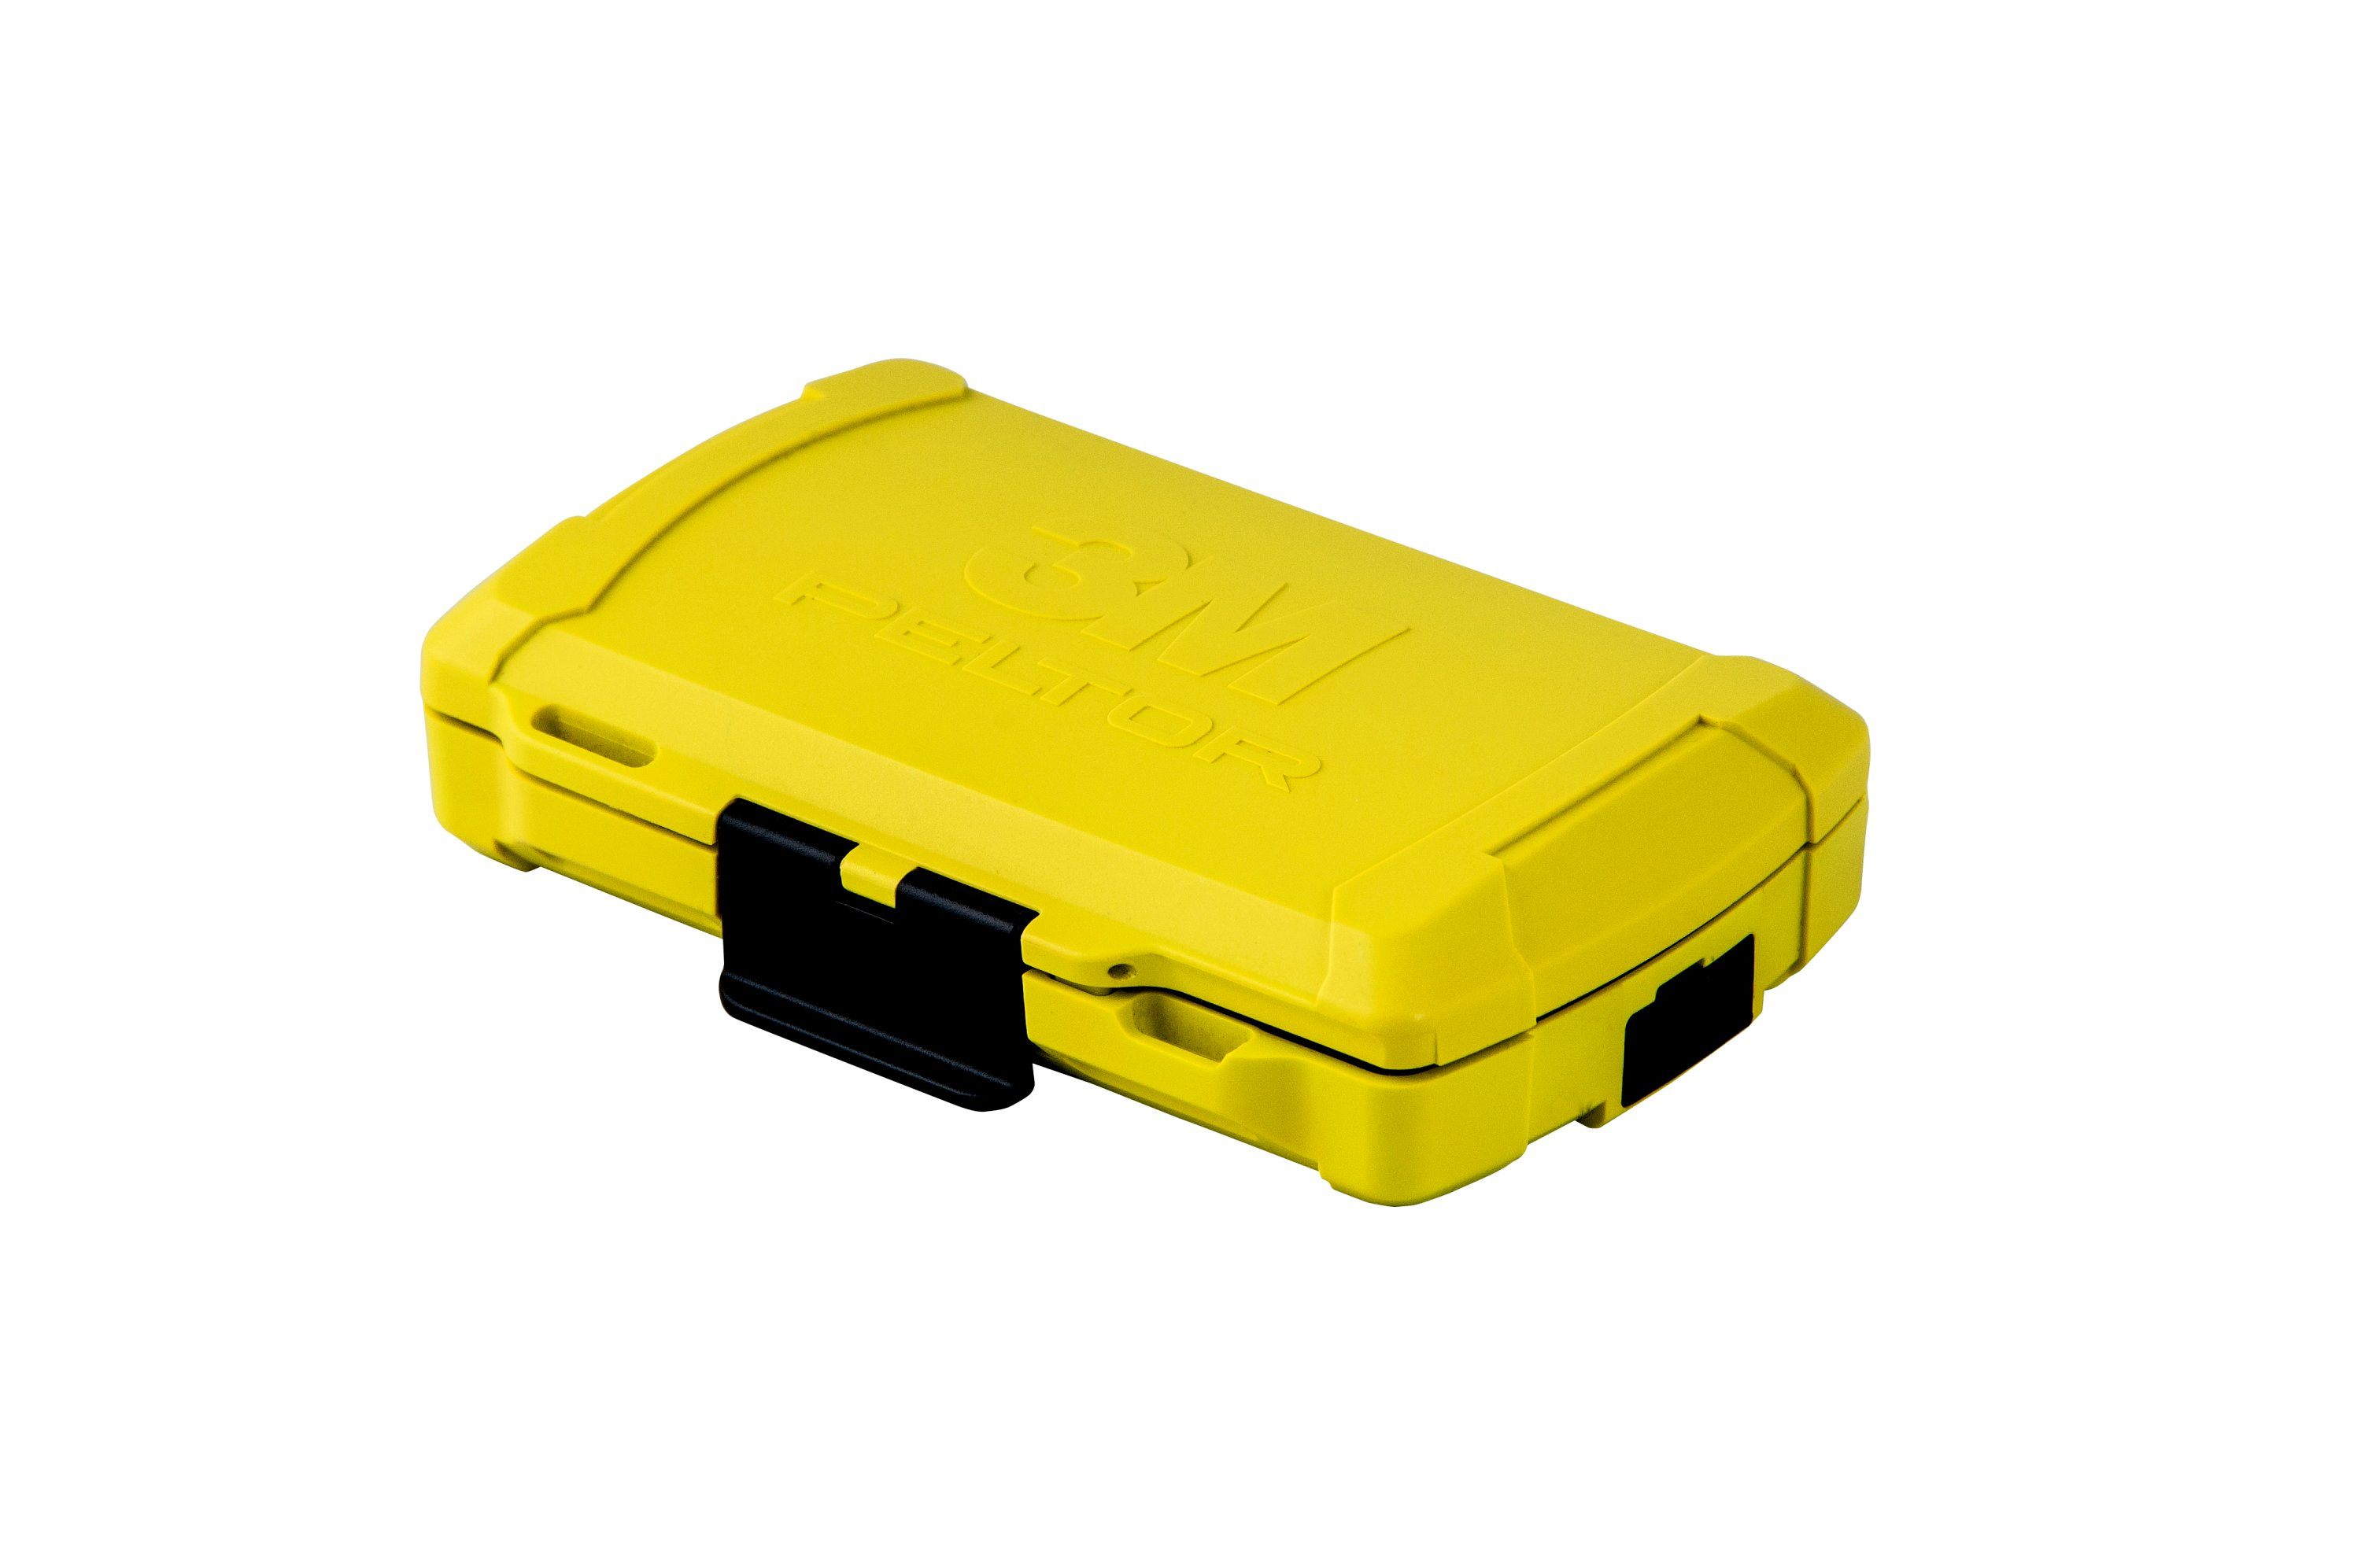 3M PELTOR 67071 Yellow LEP-100 200 Replacement Charging Case IP54 通販 